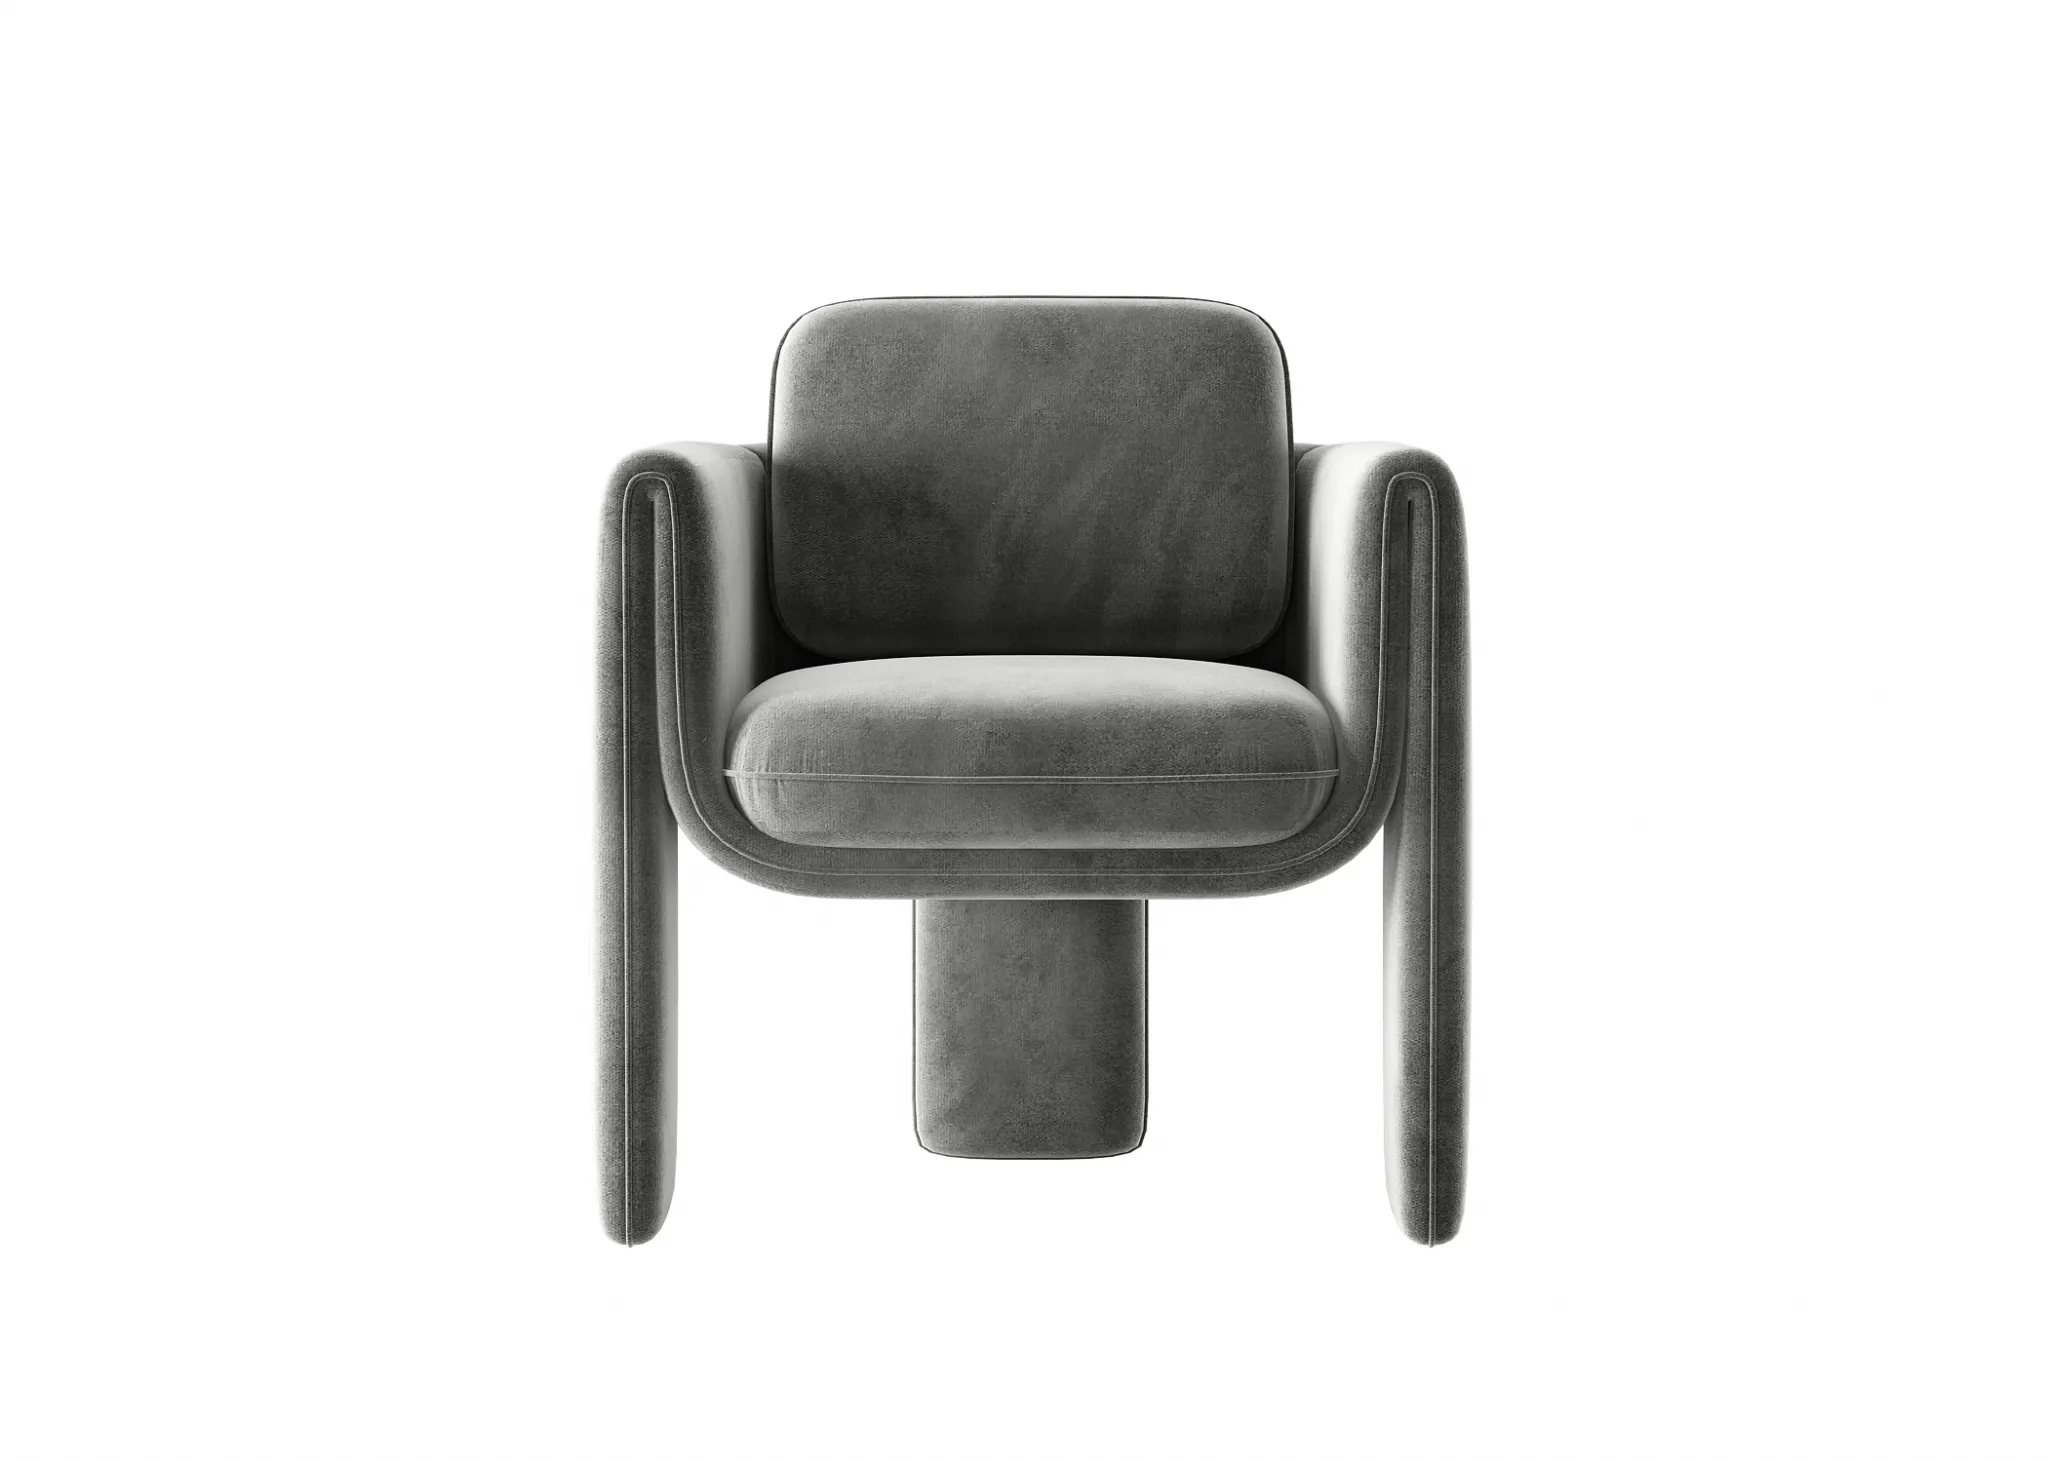 FURNITURE 3D MODELS – CHAIRS – 0002